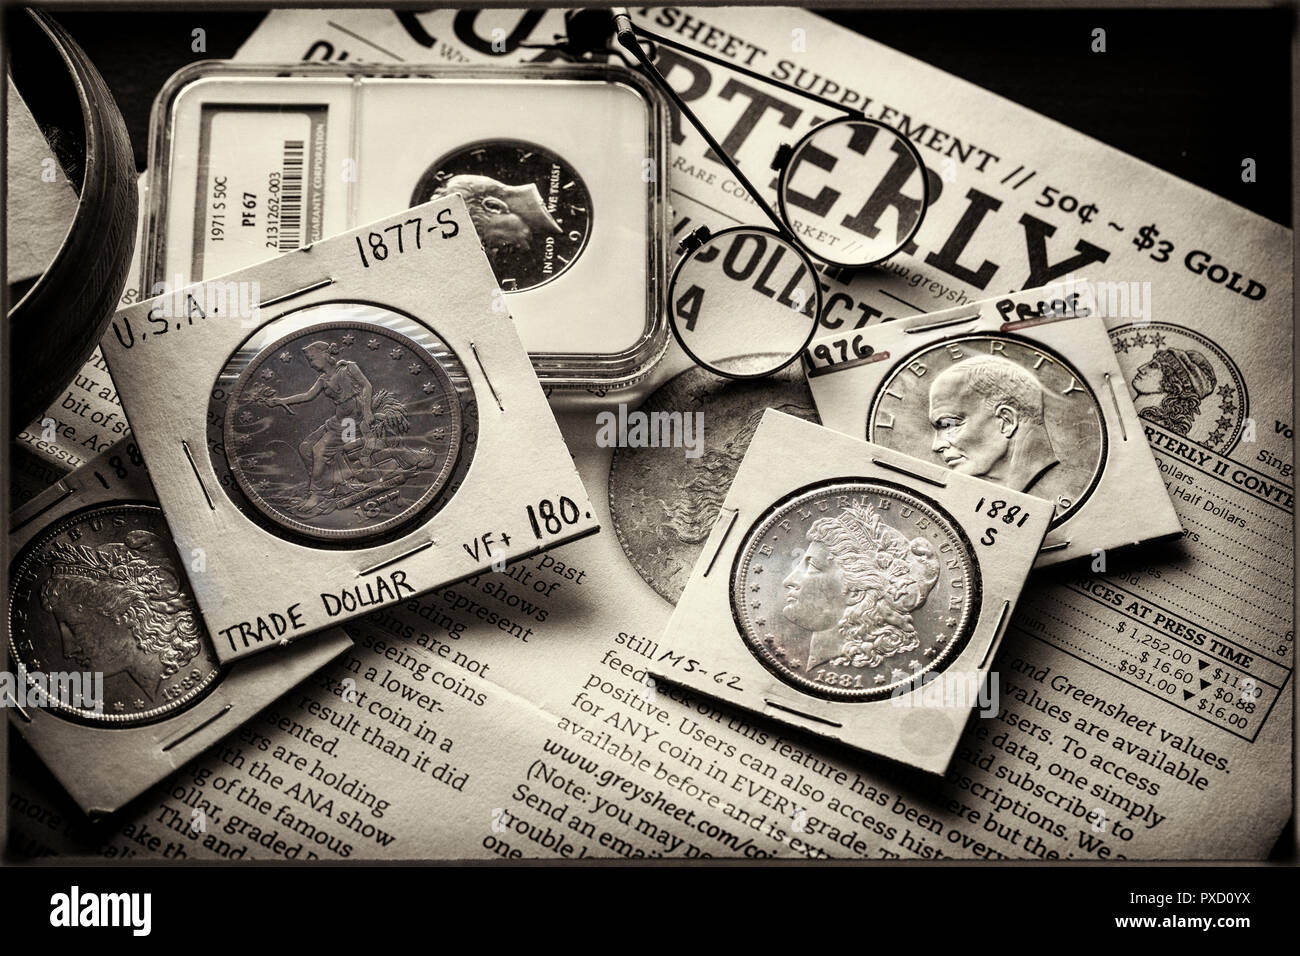 Coin Collecting - Various Coins - Morgan Dollars - Ike Dollar - Trade Dollar - against backdrop of the Greysheet with magnifiers Stock Photo